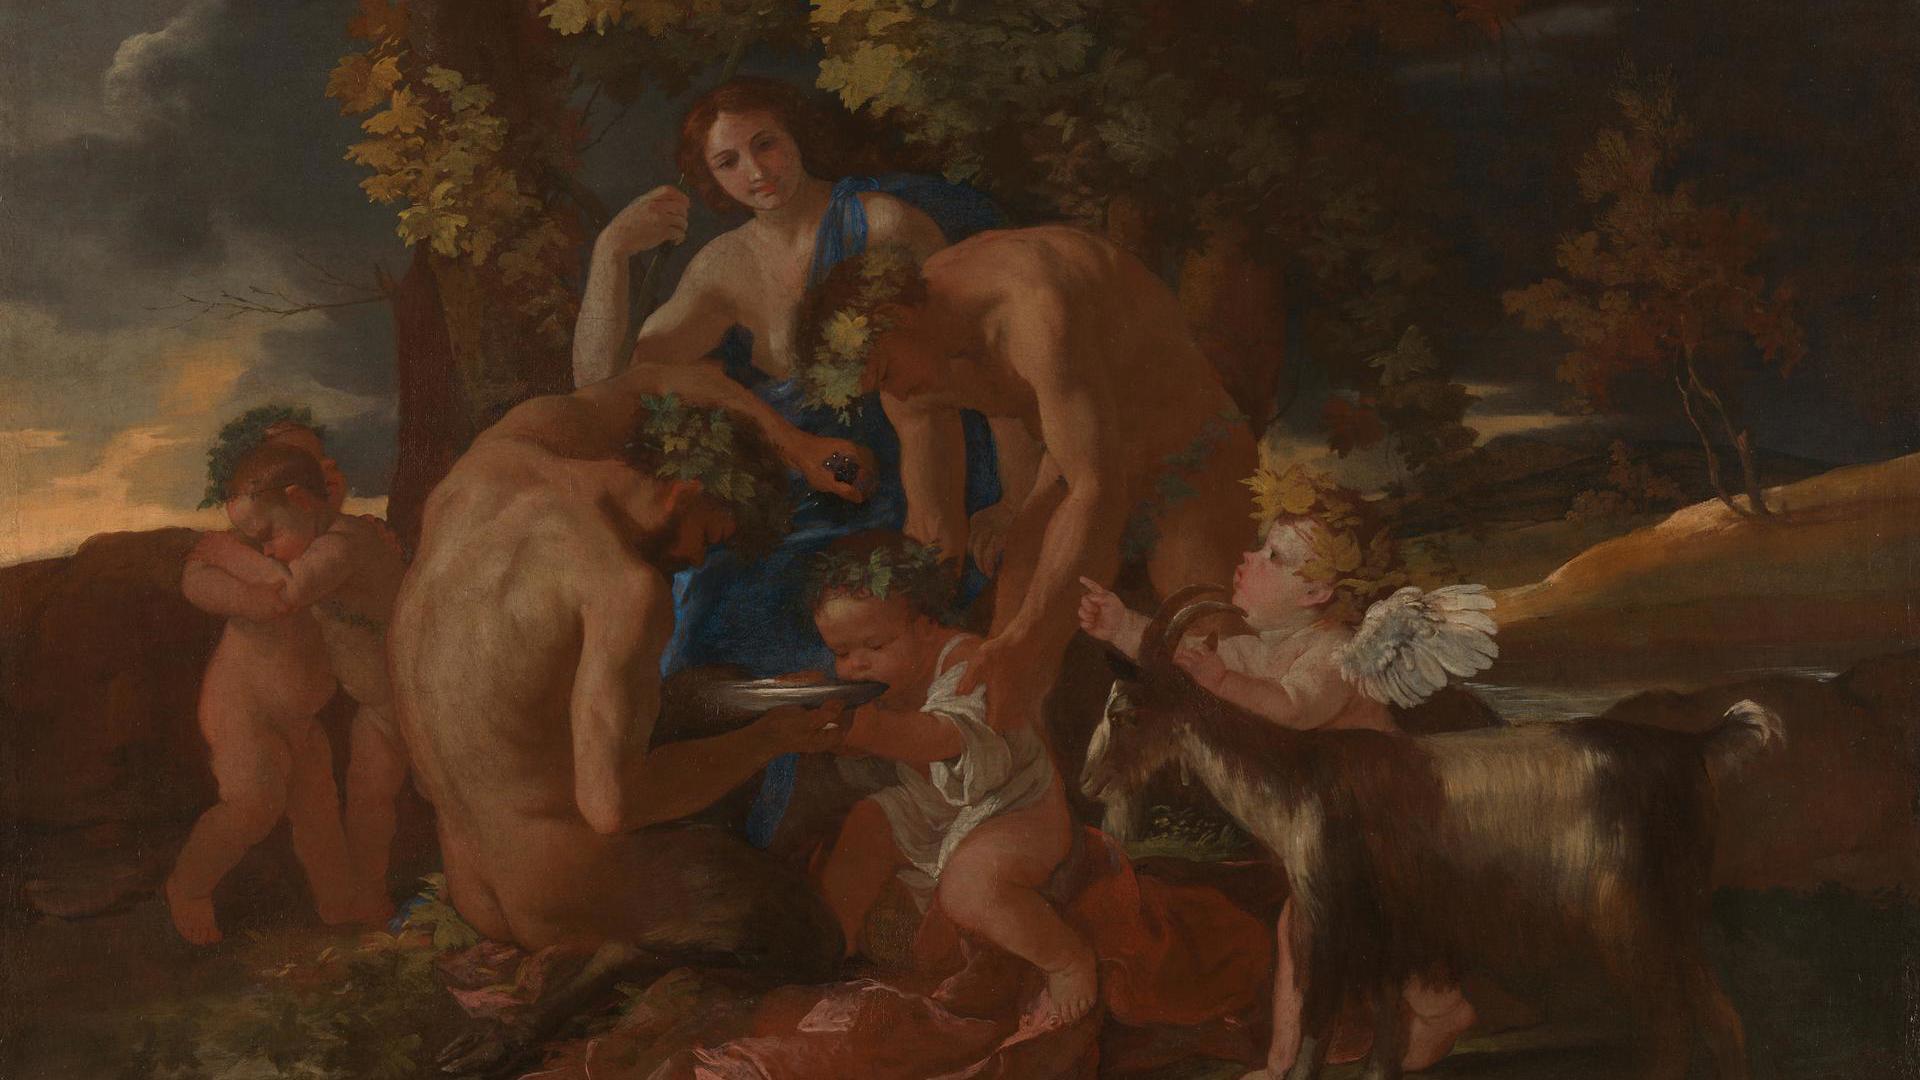 The Nurture of Bacchus by Nicolas Poussin